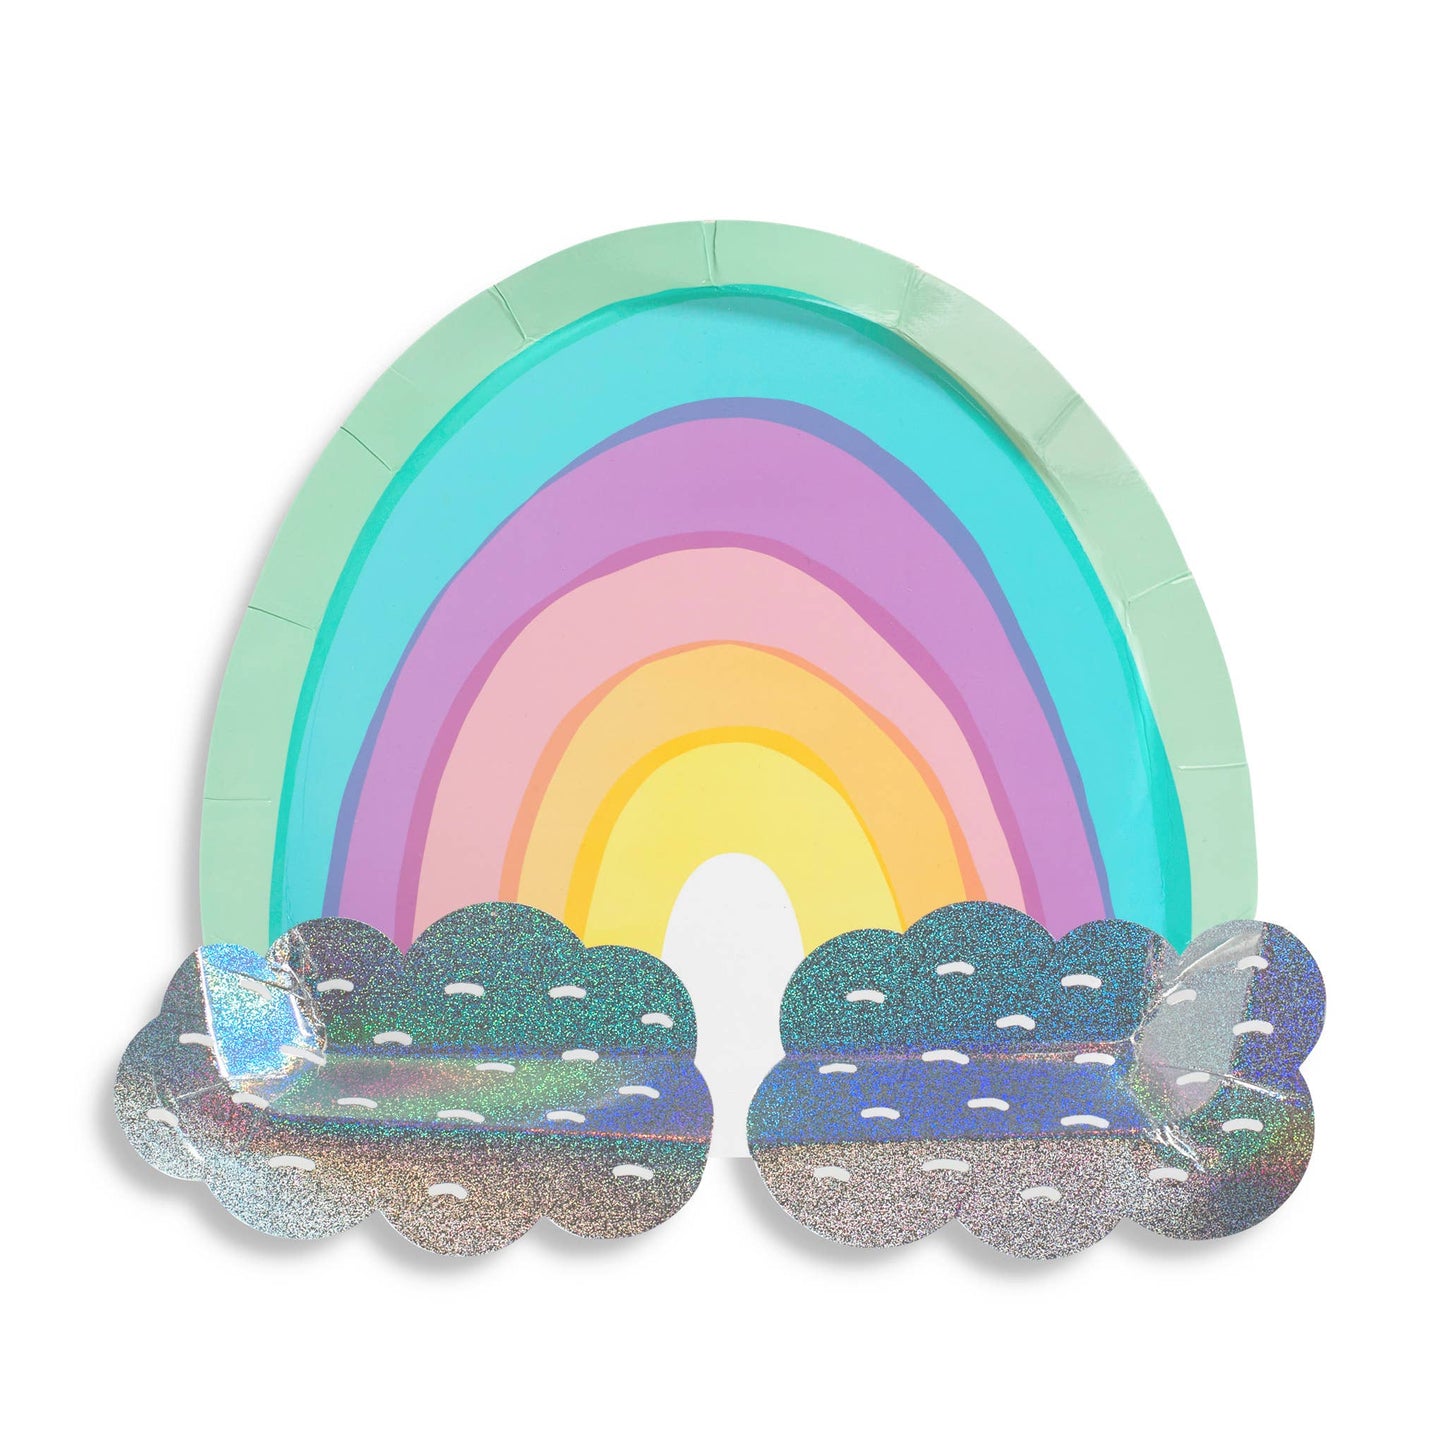 Over the Rainbow Large Plates - 8 Pk.